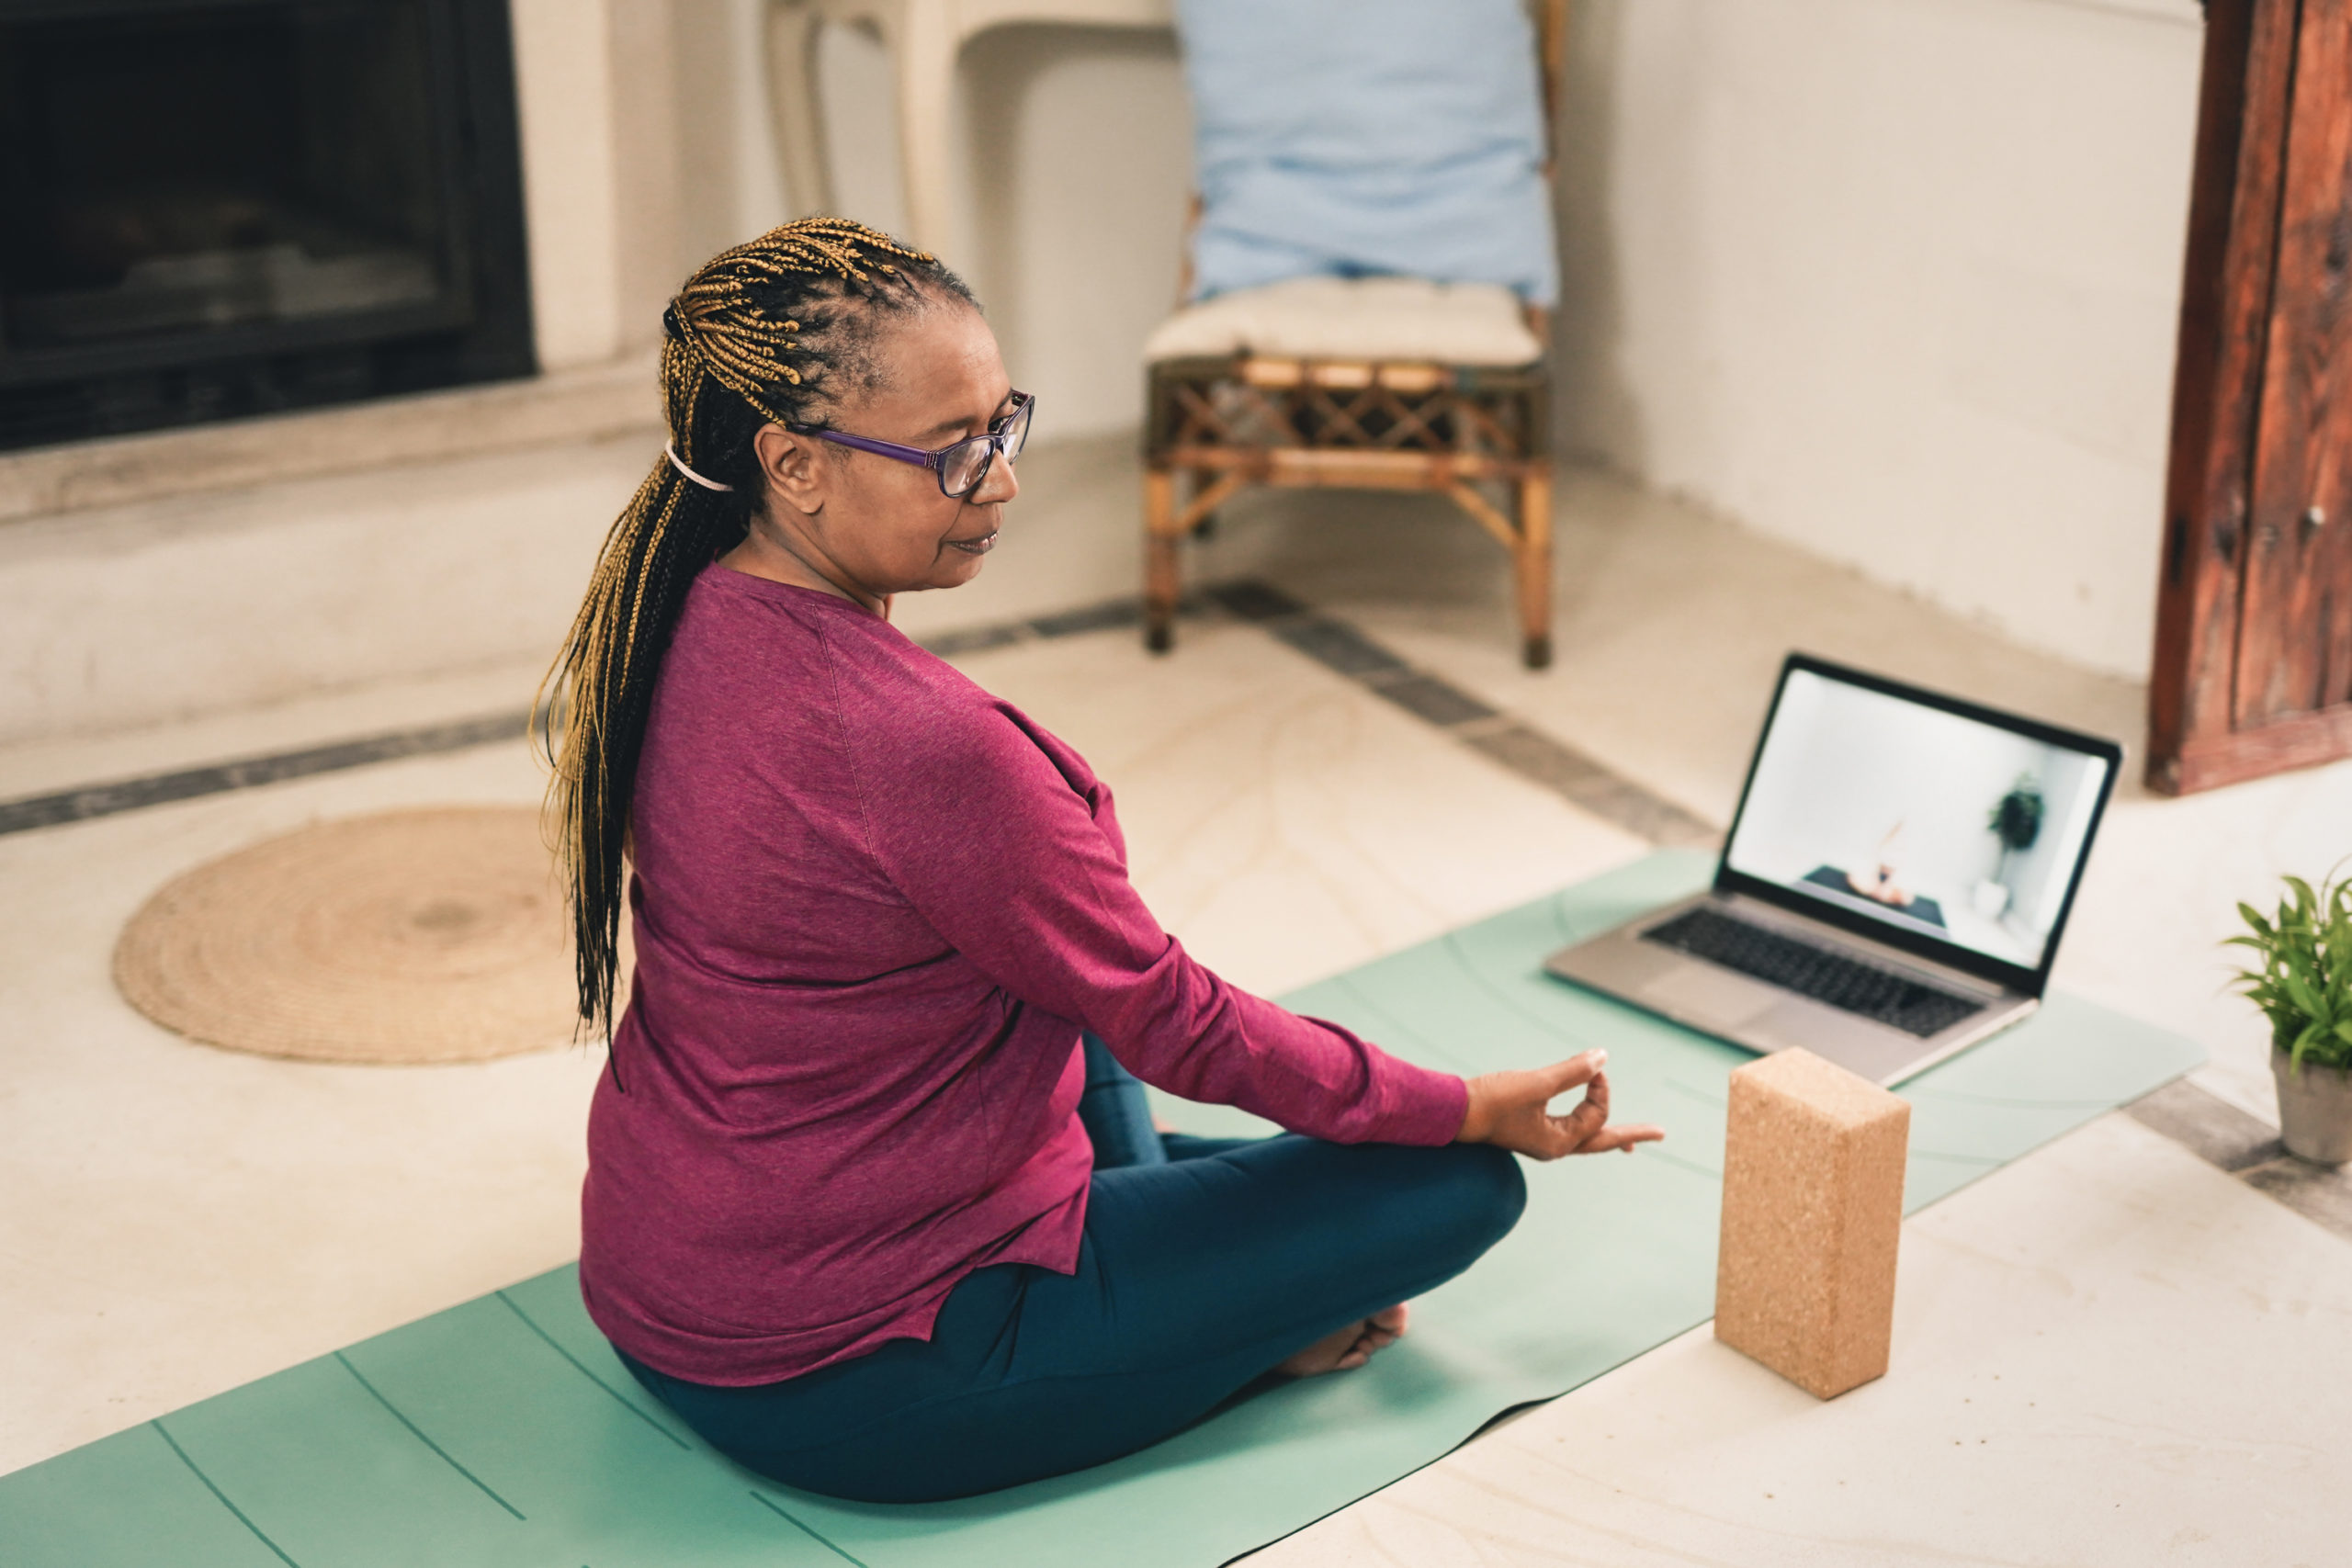 A black senior woman practices mindfulness and yoga in her home to illustrate how physical activity may help manage depression symptoms.